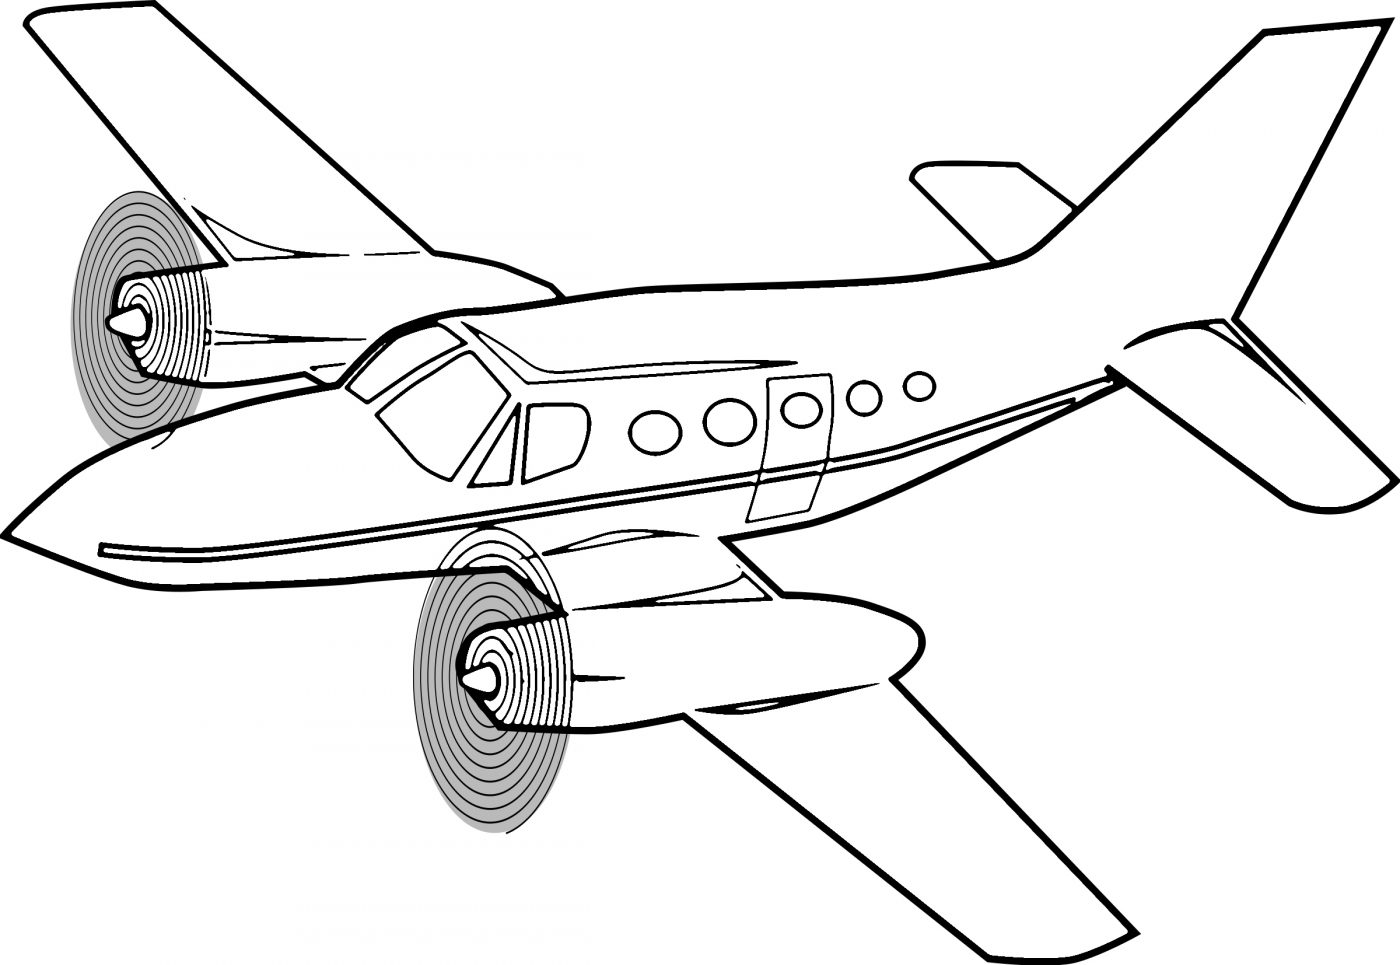 10 Free Airplane Coloring Pages for Kids